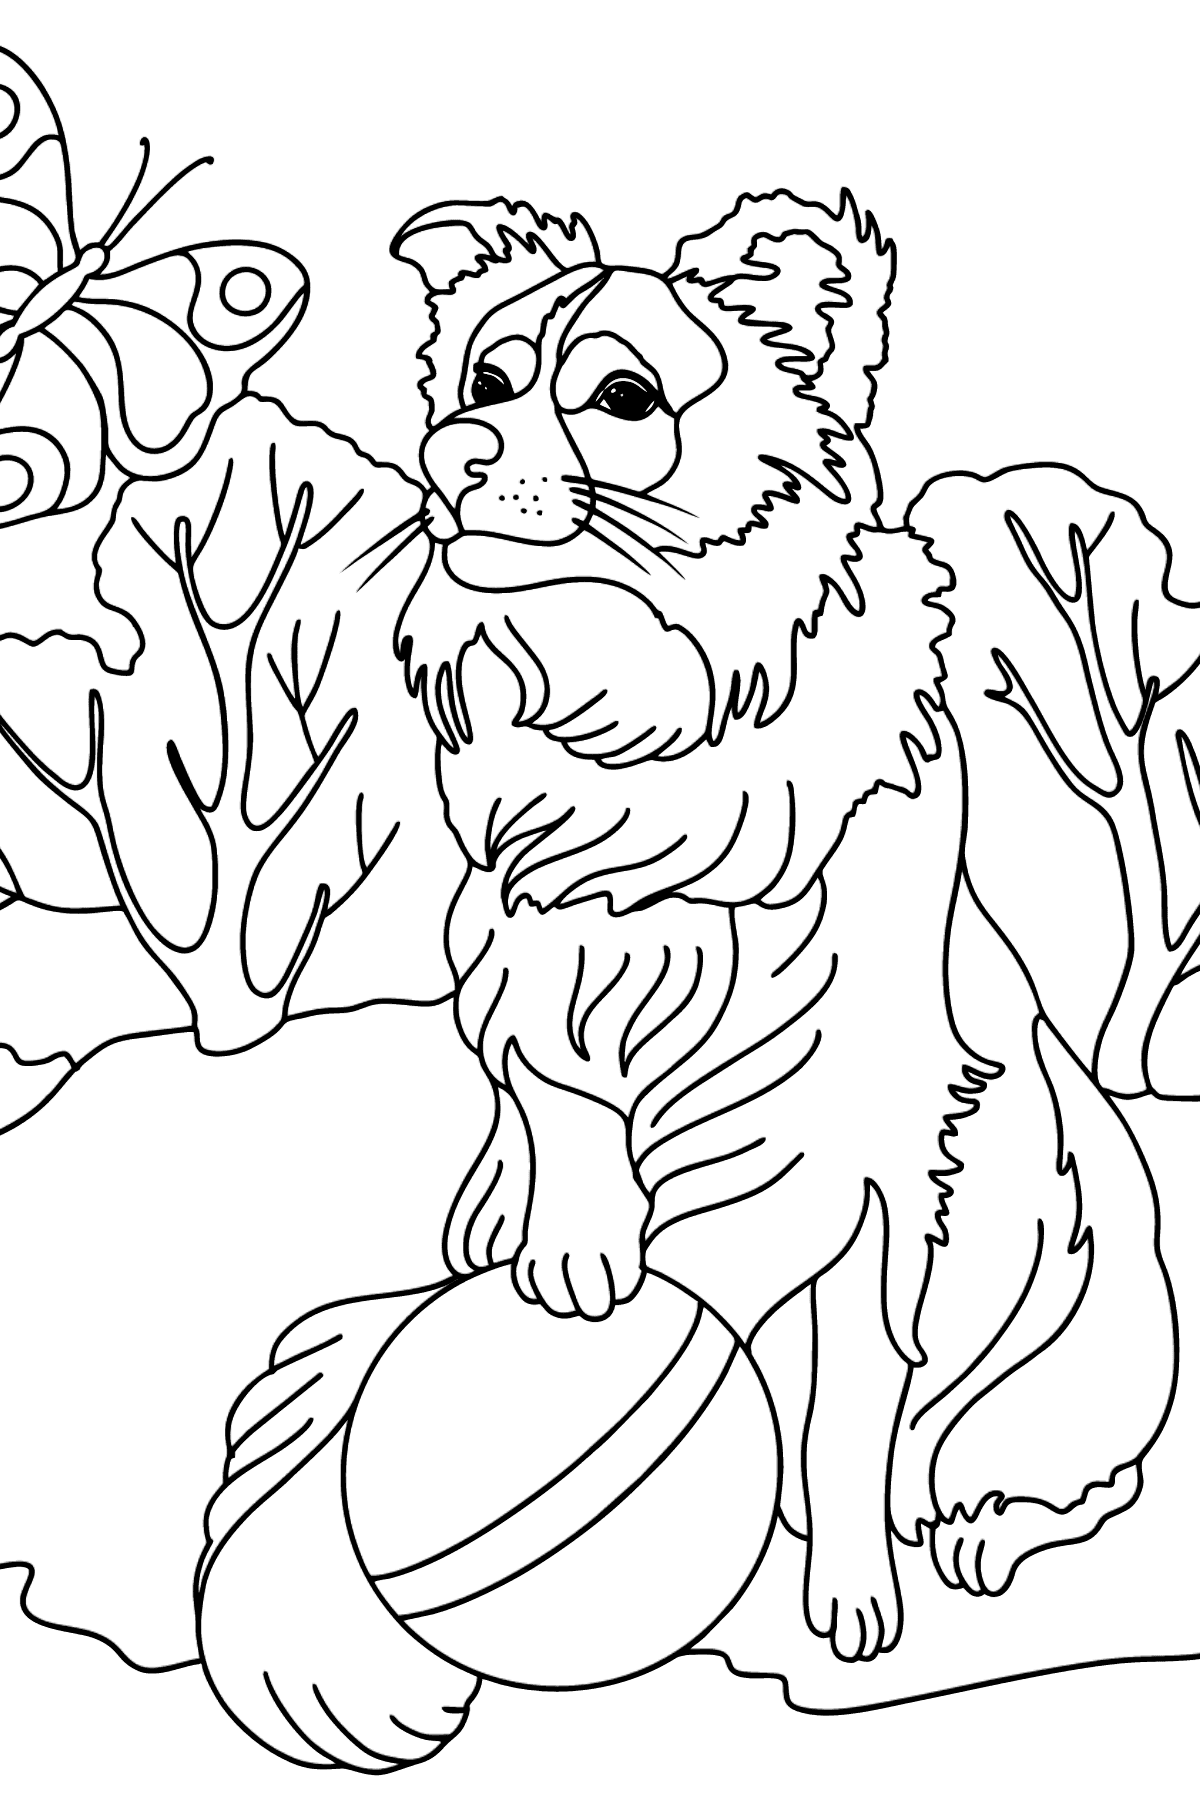 Collie coloring page - Coloring Pages for Kids